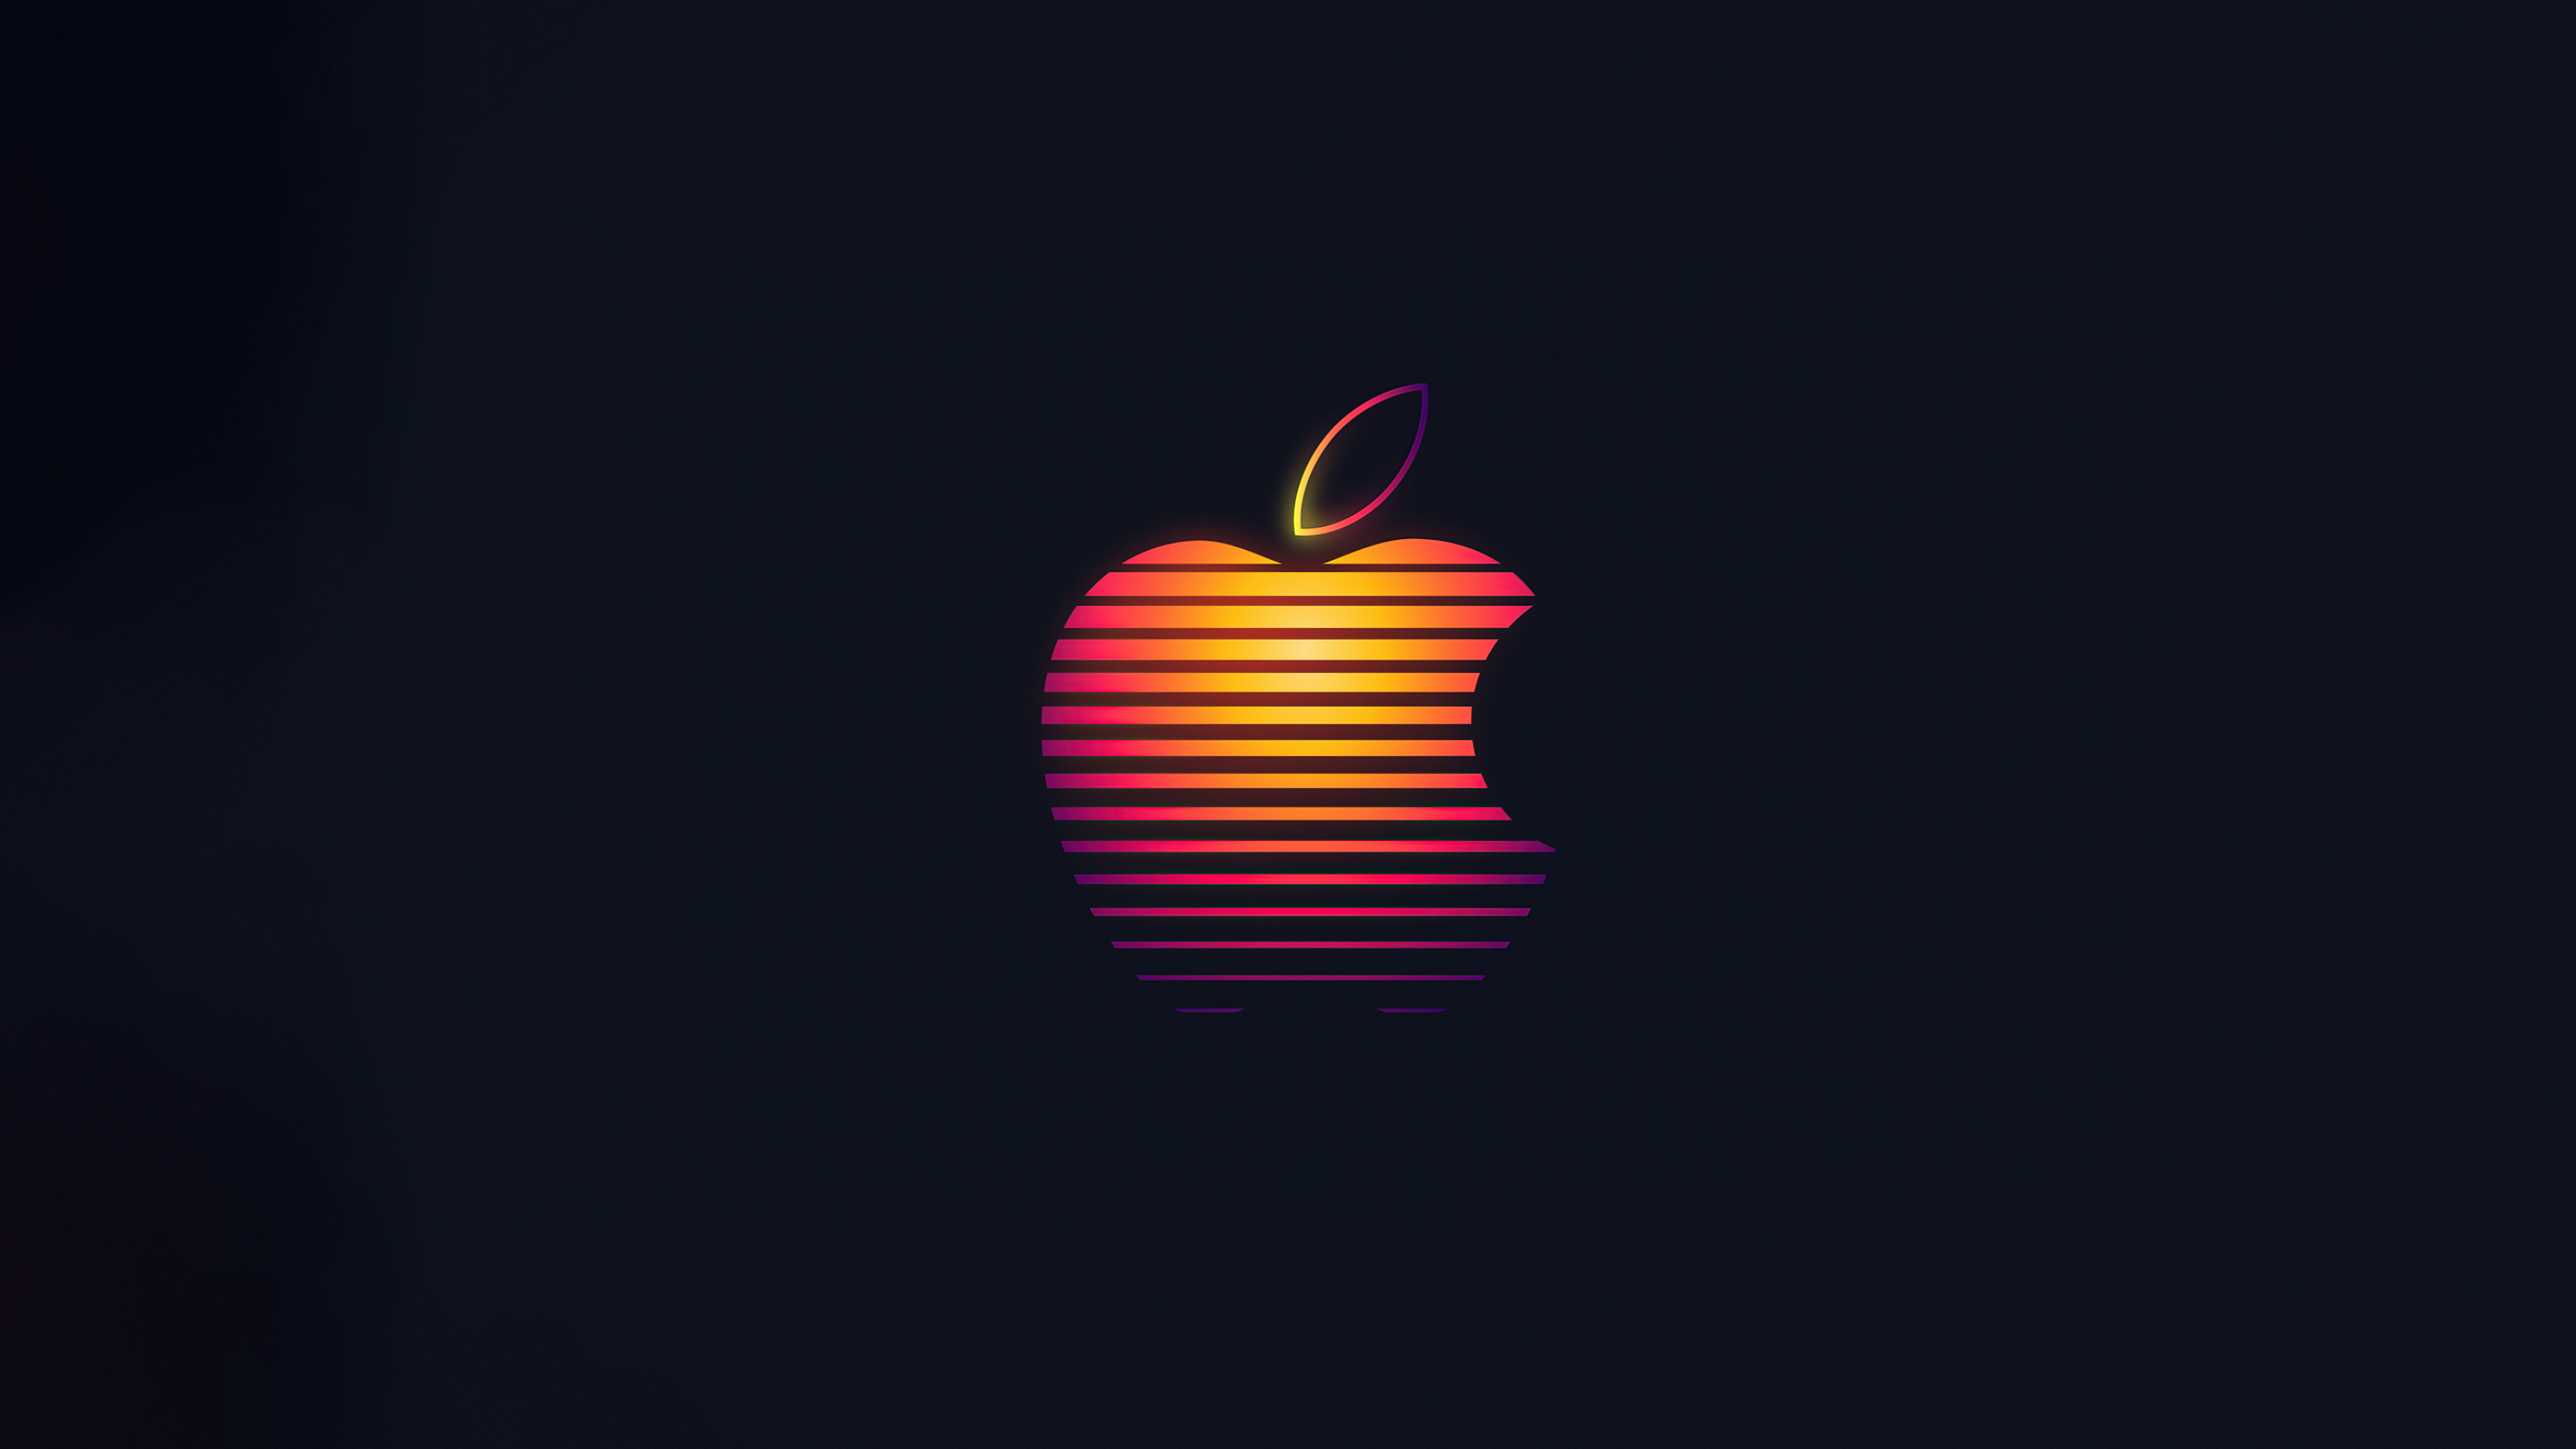 50+ 4K Apple Wallpapers | Background Images